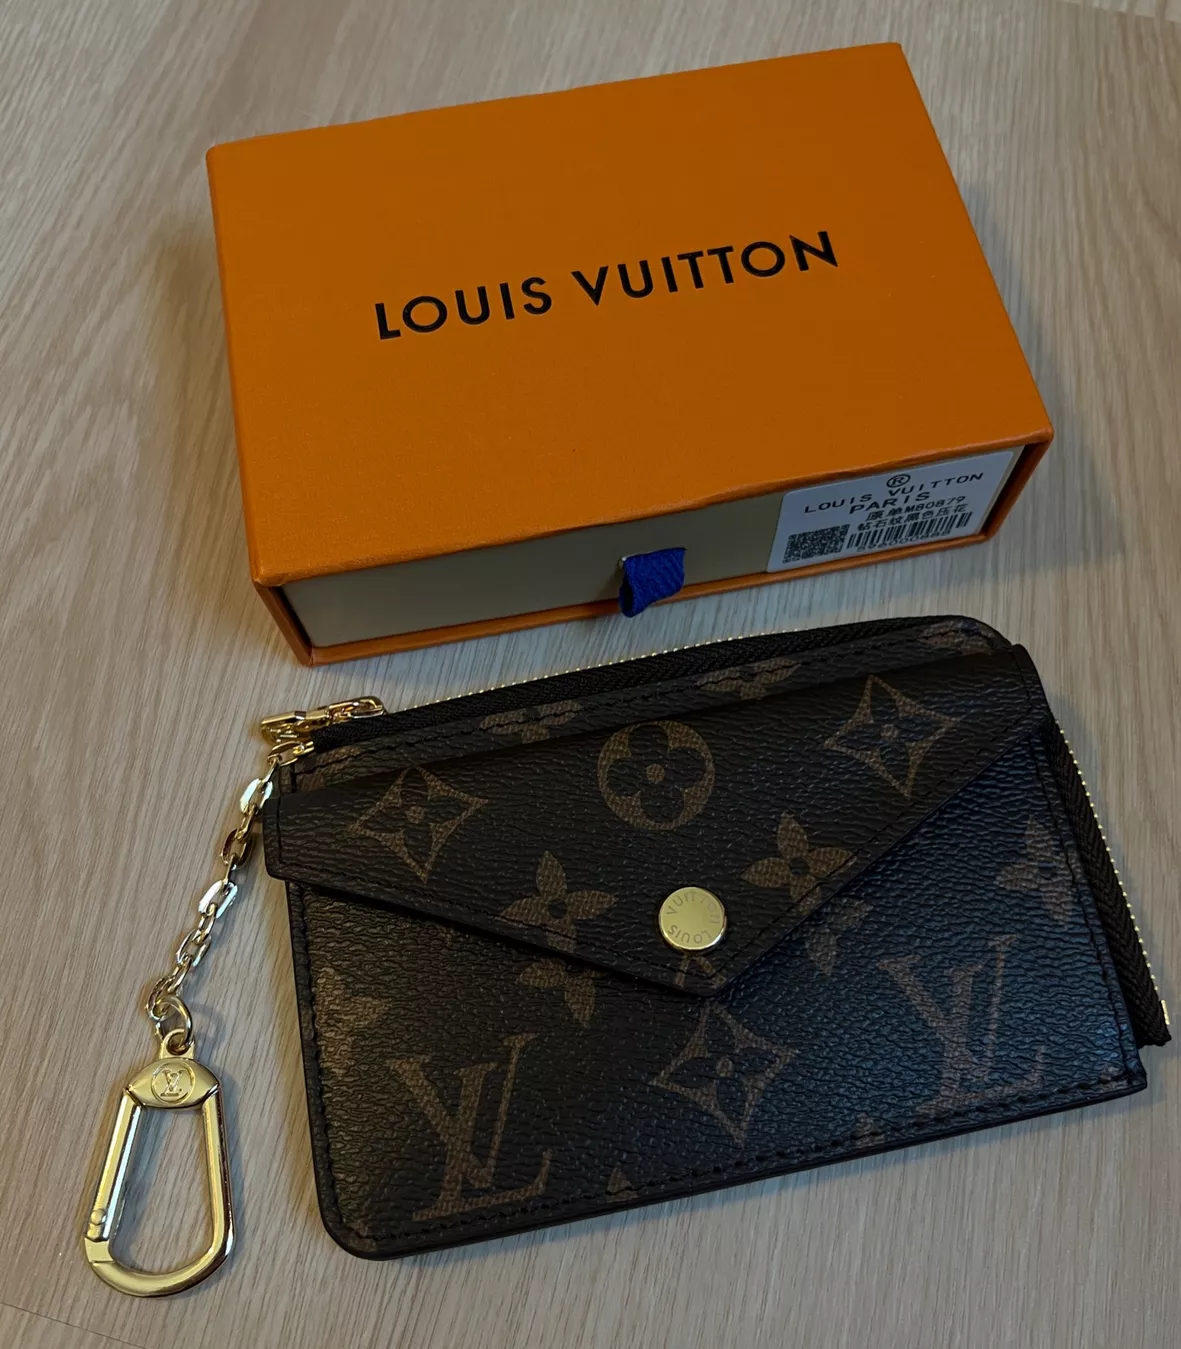 Another DHgate Louis Vuitton $8.17 Bag Haul! - The Caramel Colored  Empreinte OnTheGo MM Tote Bag 